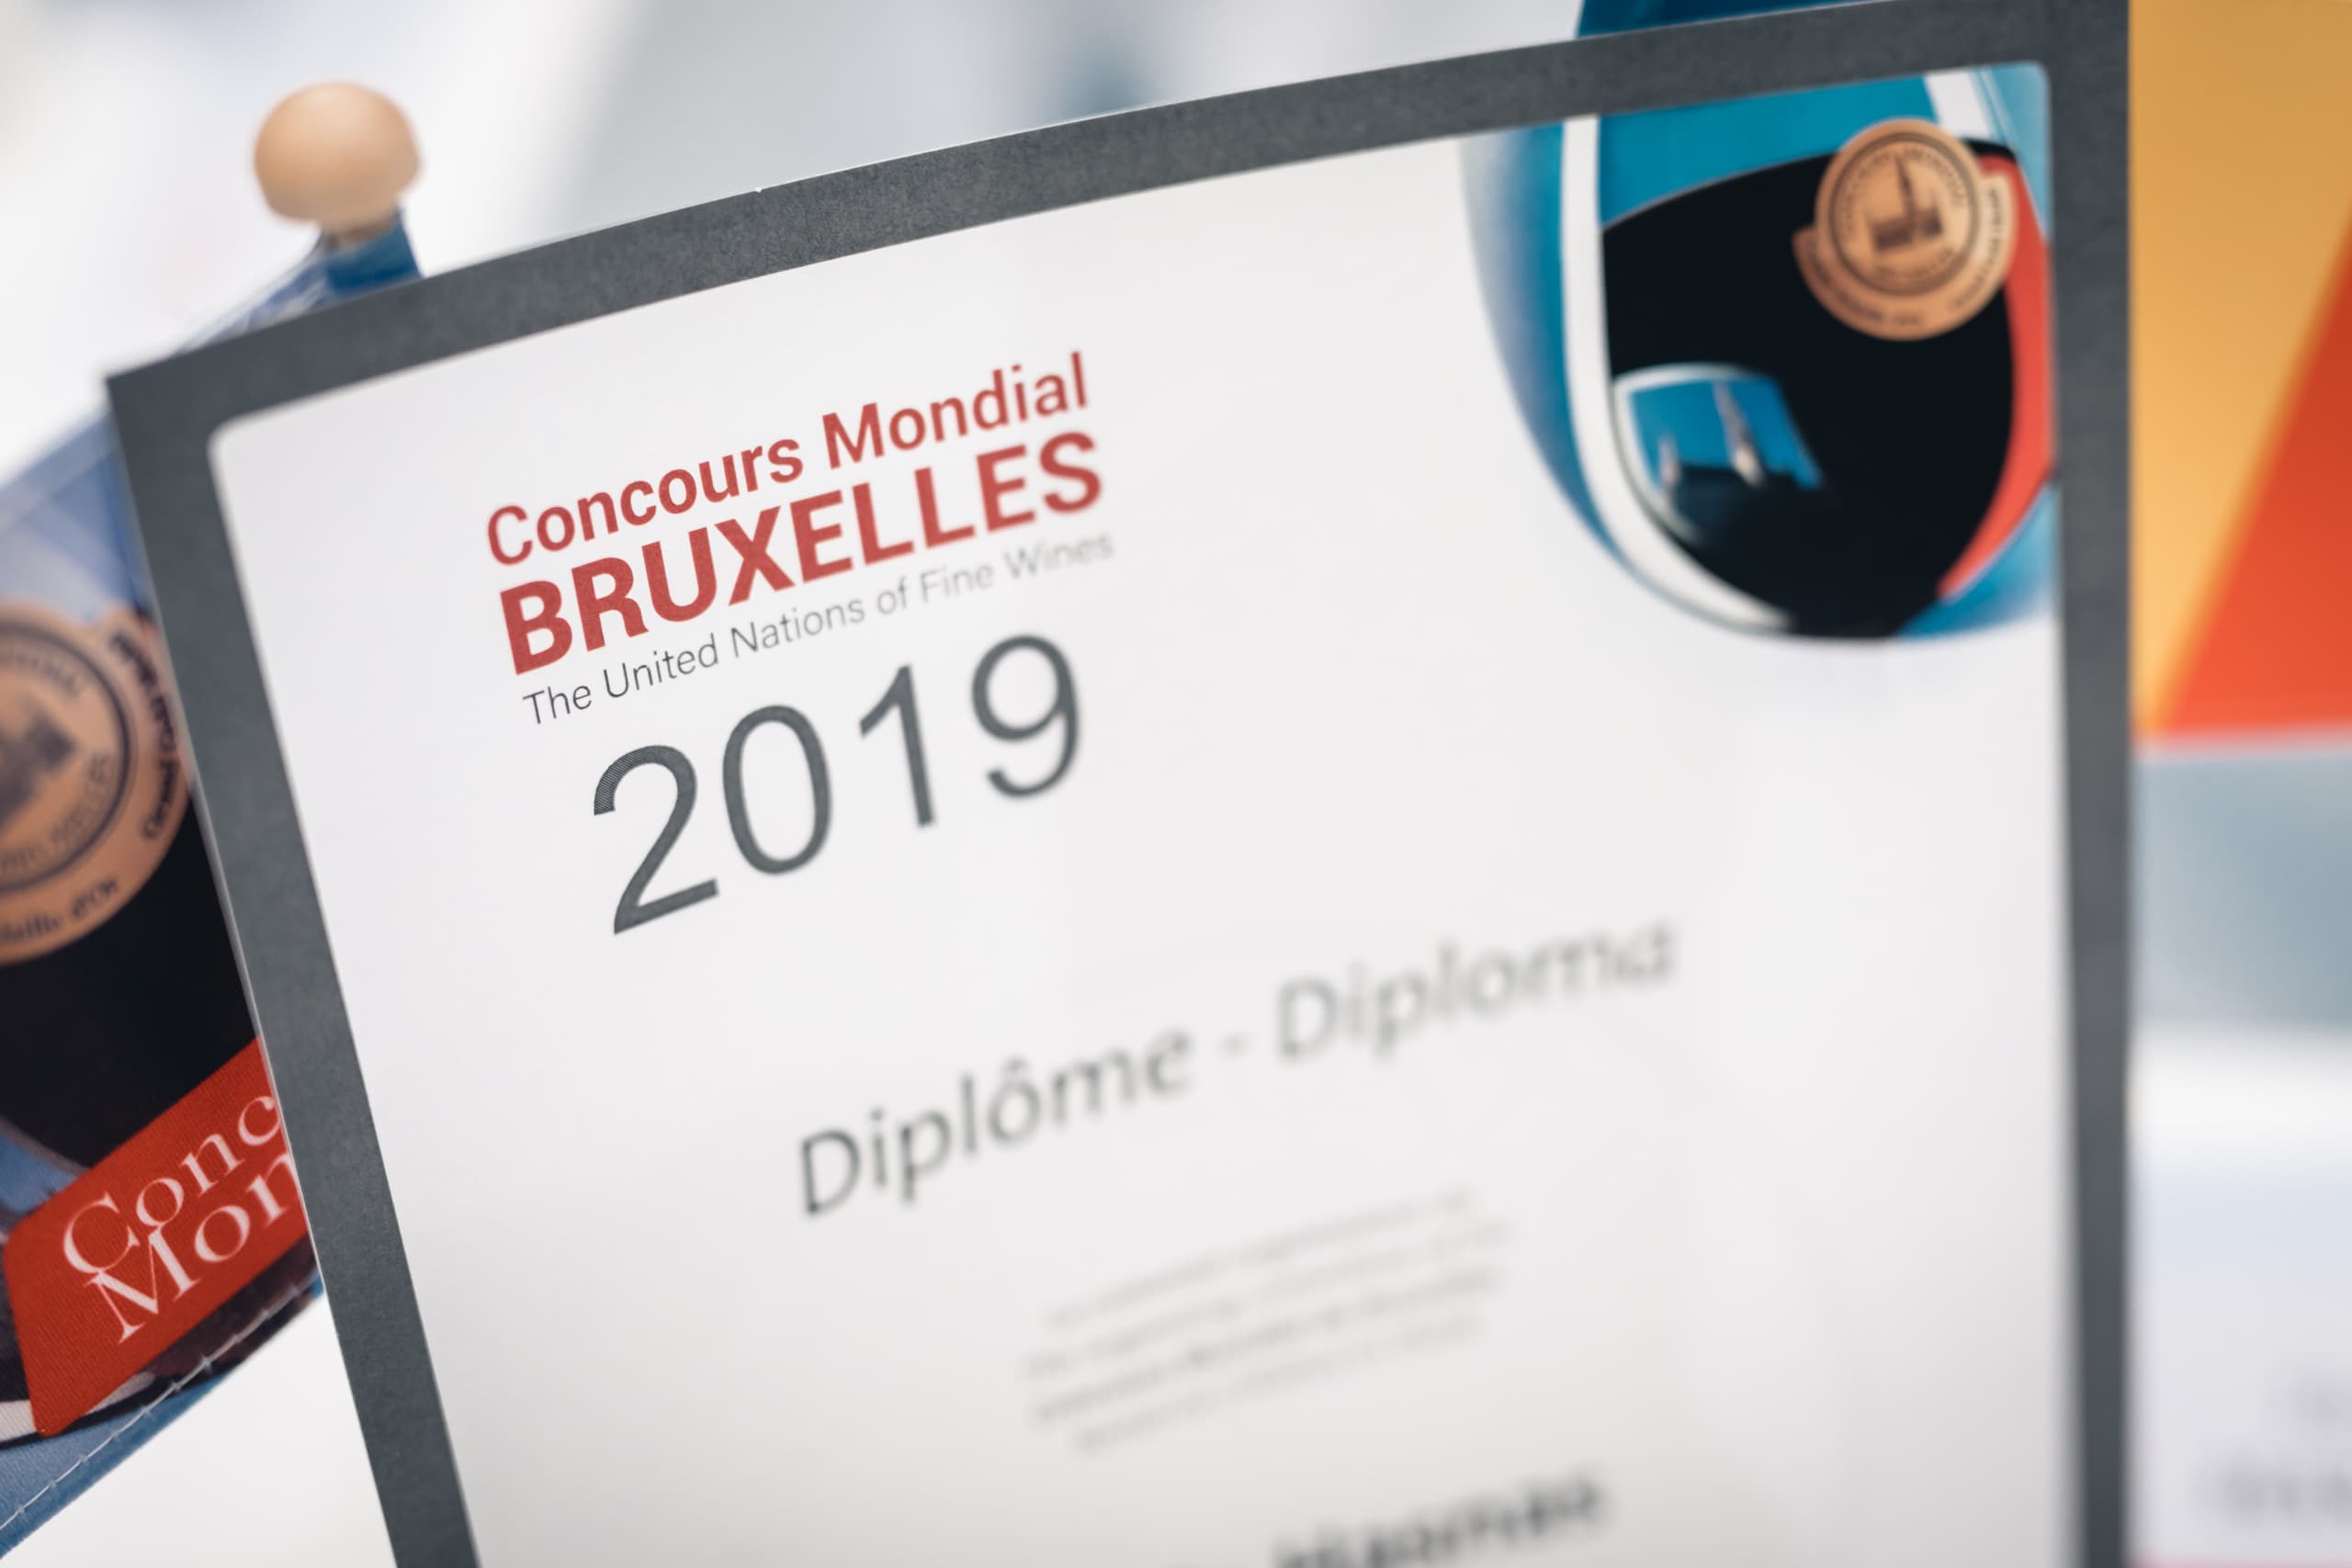 Concours Mondial 2019 certificate